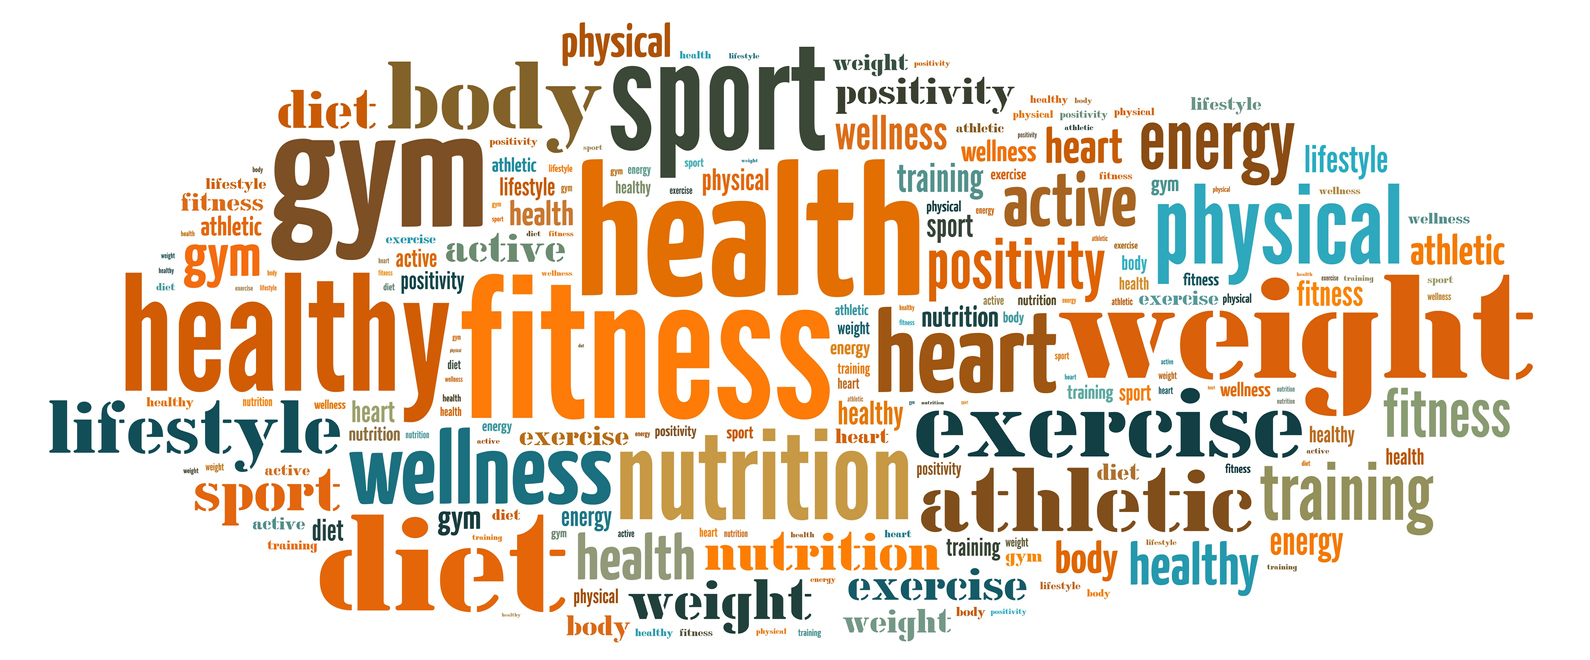 What does health mean to you?